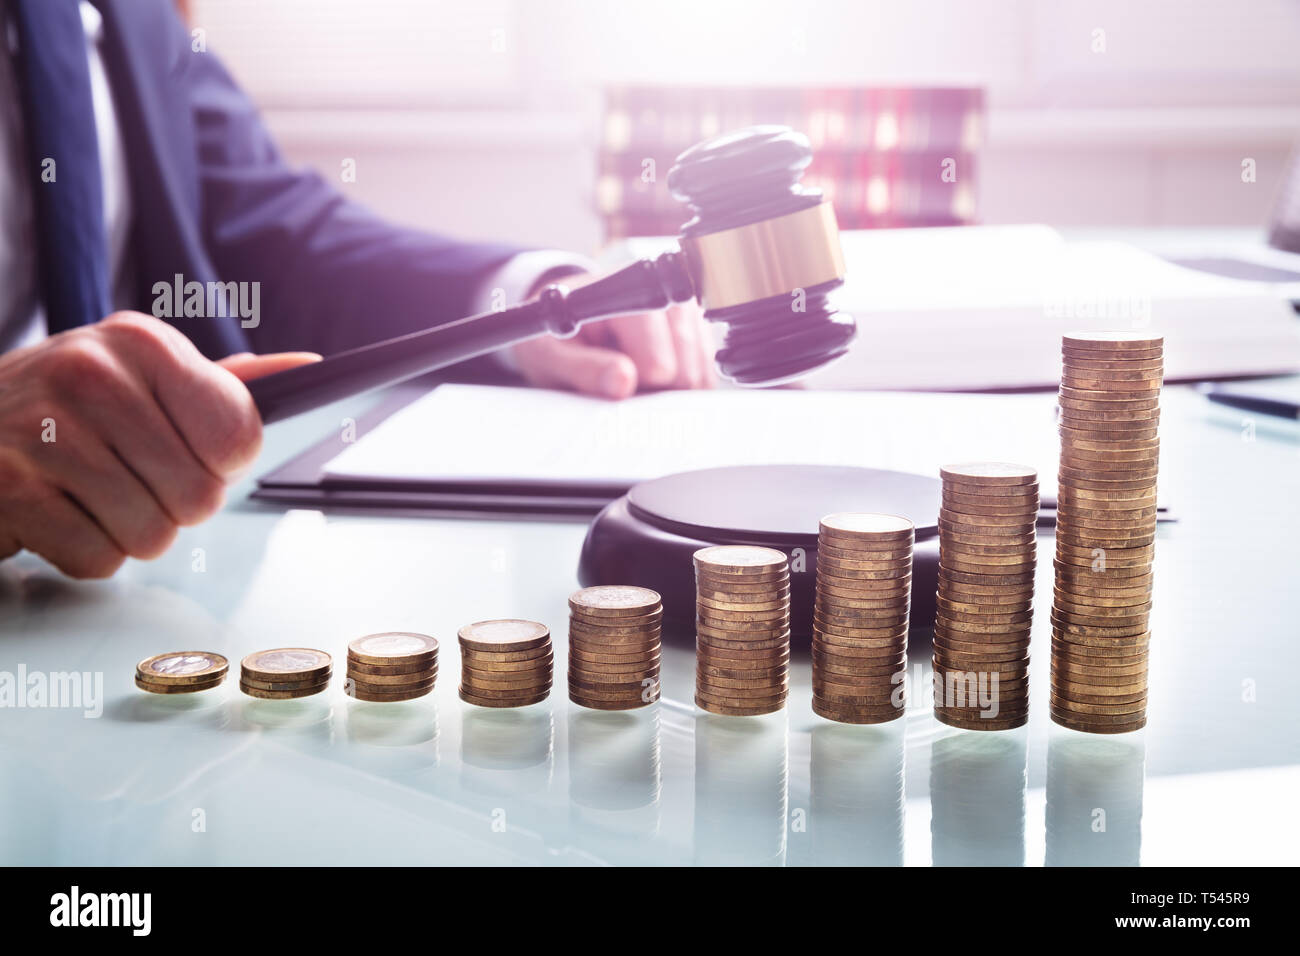 Close-up Of Judge Hand Hitting Mallet On Sound Block In Front Of Stacked Coins Stock Photo